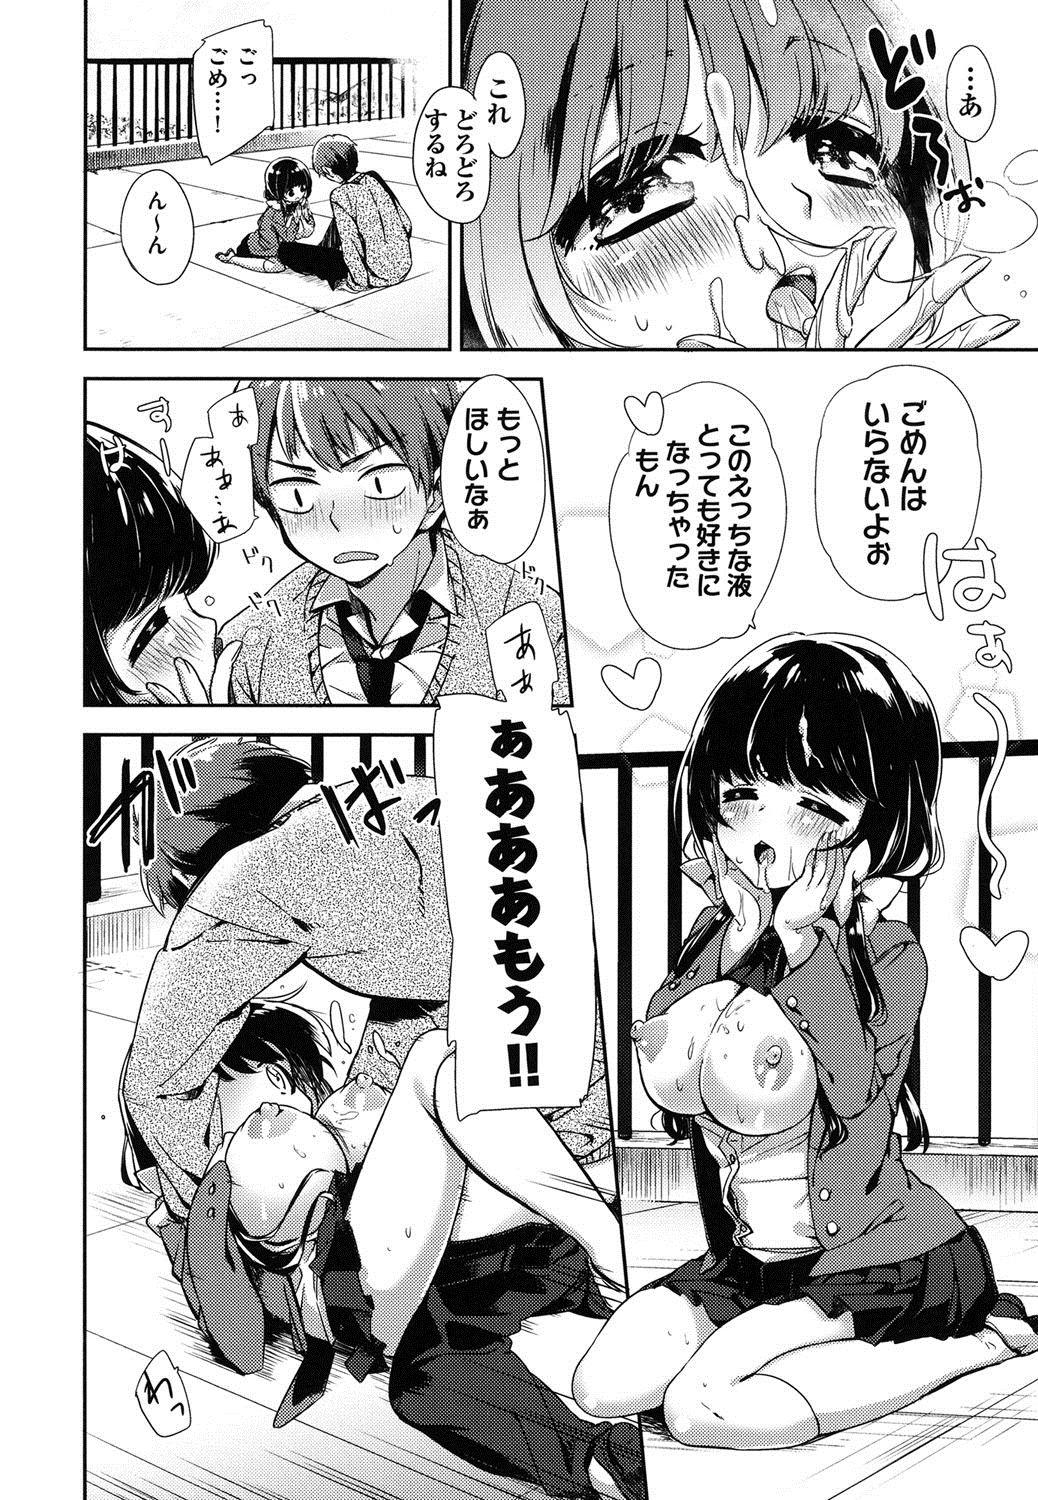 Oppai March 196